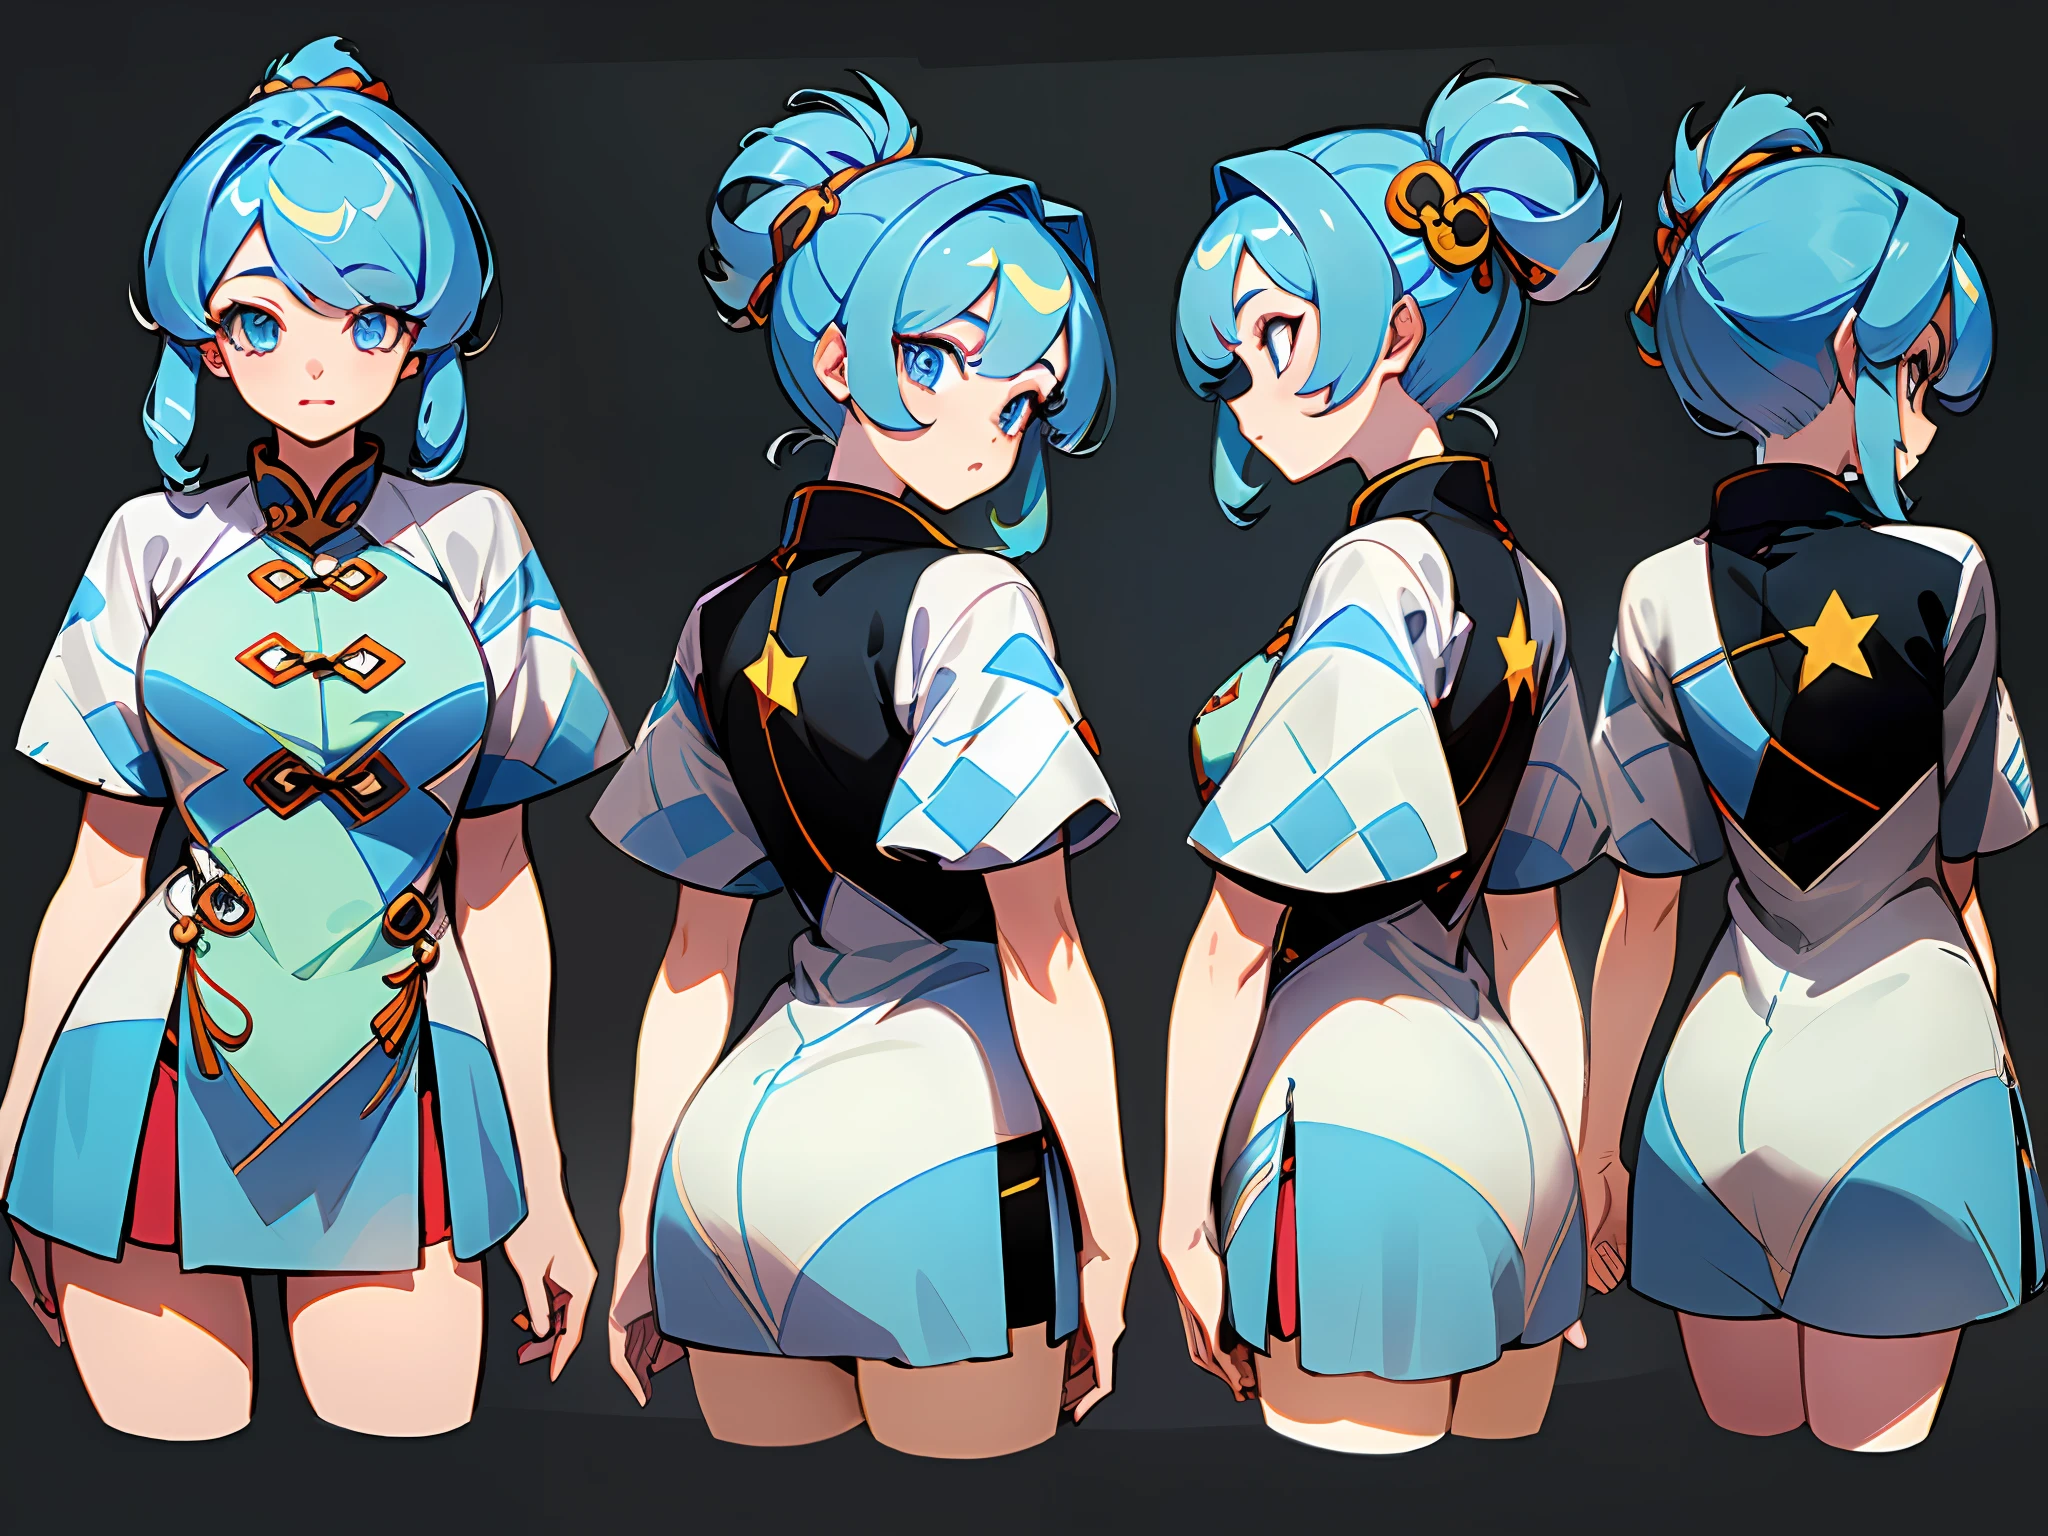 ((masterpiece)),(((best quality))),(character design sheet, same character, front, side, back), illustration, 1 girl, hair color, bangs, hairstyle fax, eyes, environment change scene, Hairstyle Fax, Pose Zitai, Female, Shirt Shangyi, Star, Charturnbetalora, (simple background, white background: 1.3), --6